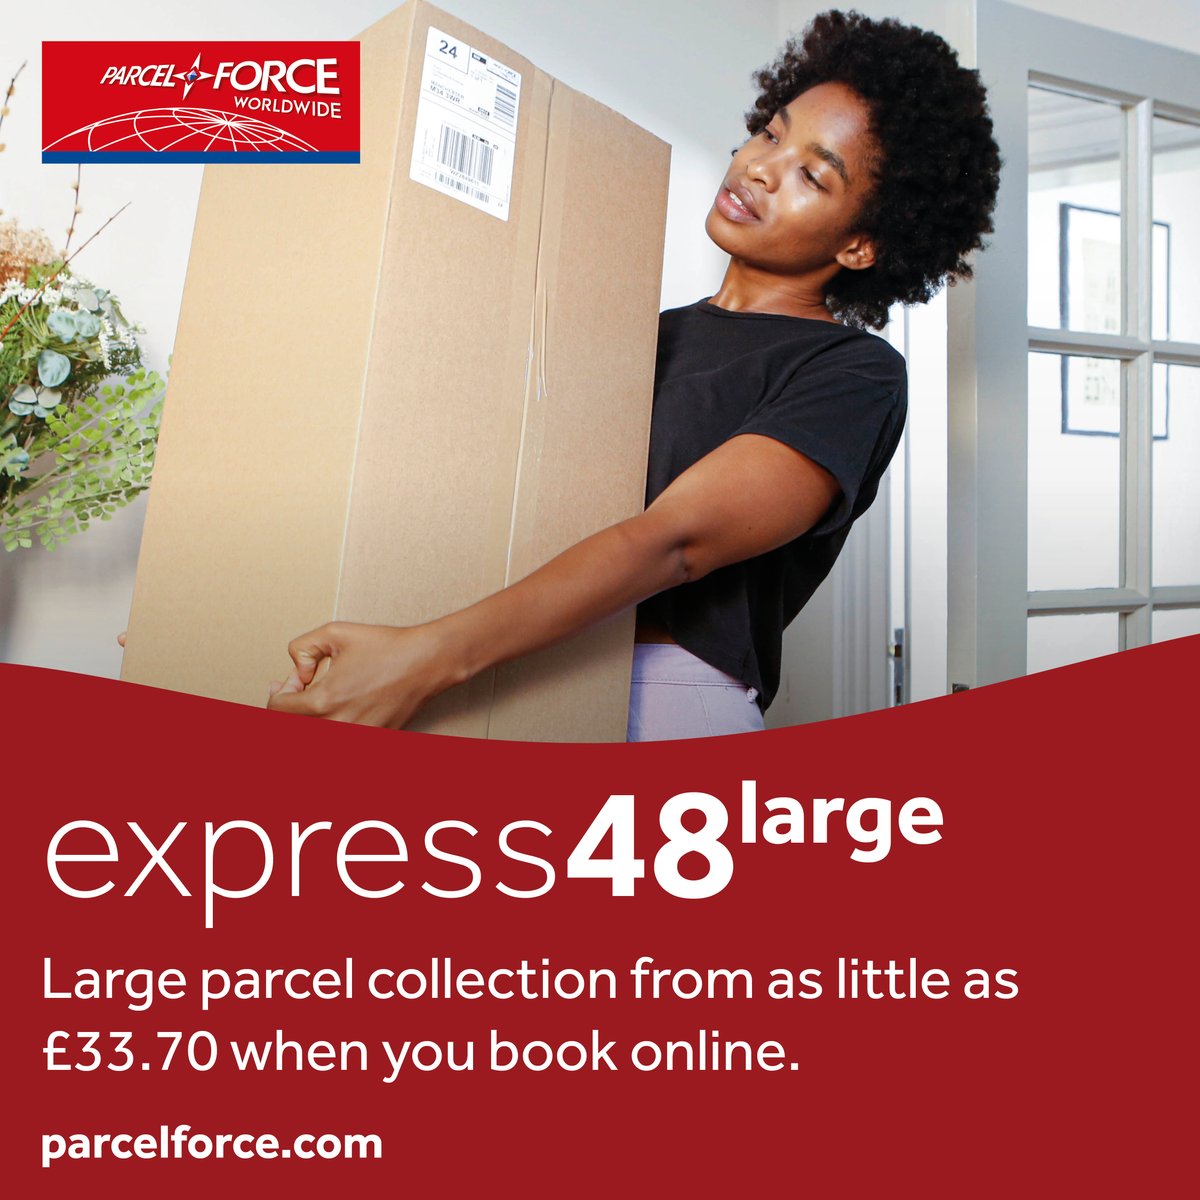 Large parcel delivery from as little as £33.70 with collection when you book online. Book now at: ms.spr.ly/6016cmaQp